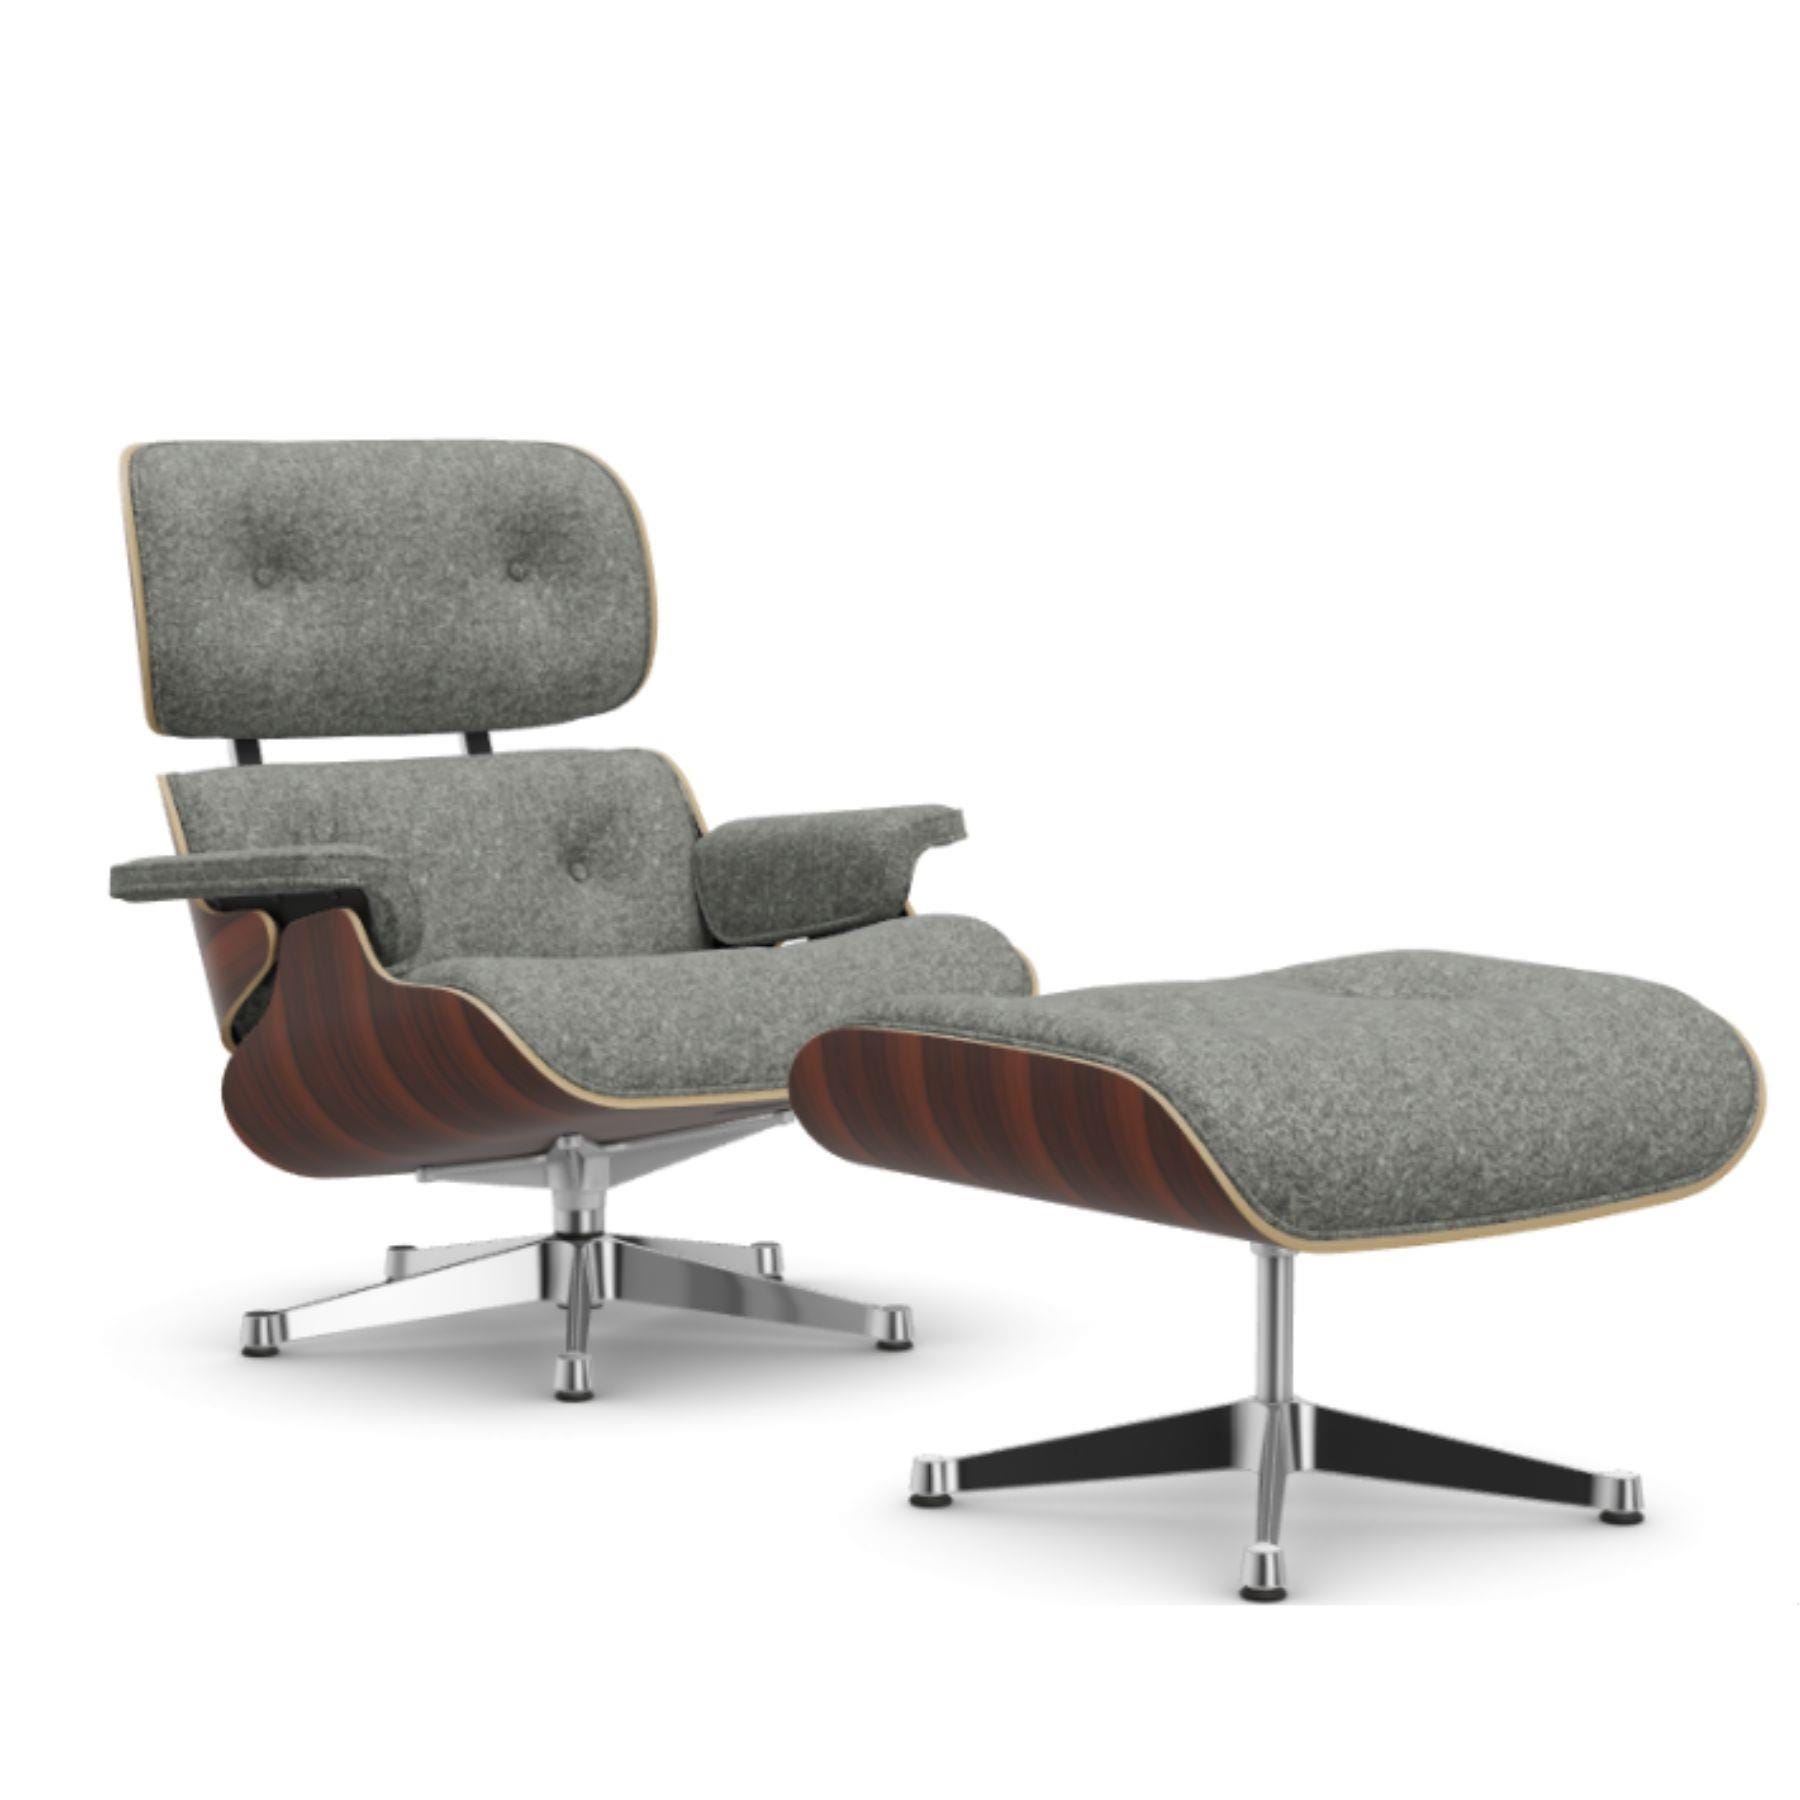 Vitra Eames Classic Lounge Chair Santos Palisander Nubia Salt And Pepper Polished Aluminium With Ottoman Light Wood Designer Furniture From Hollow